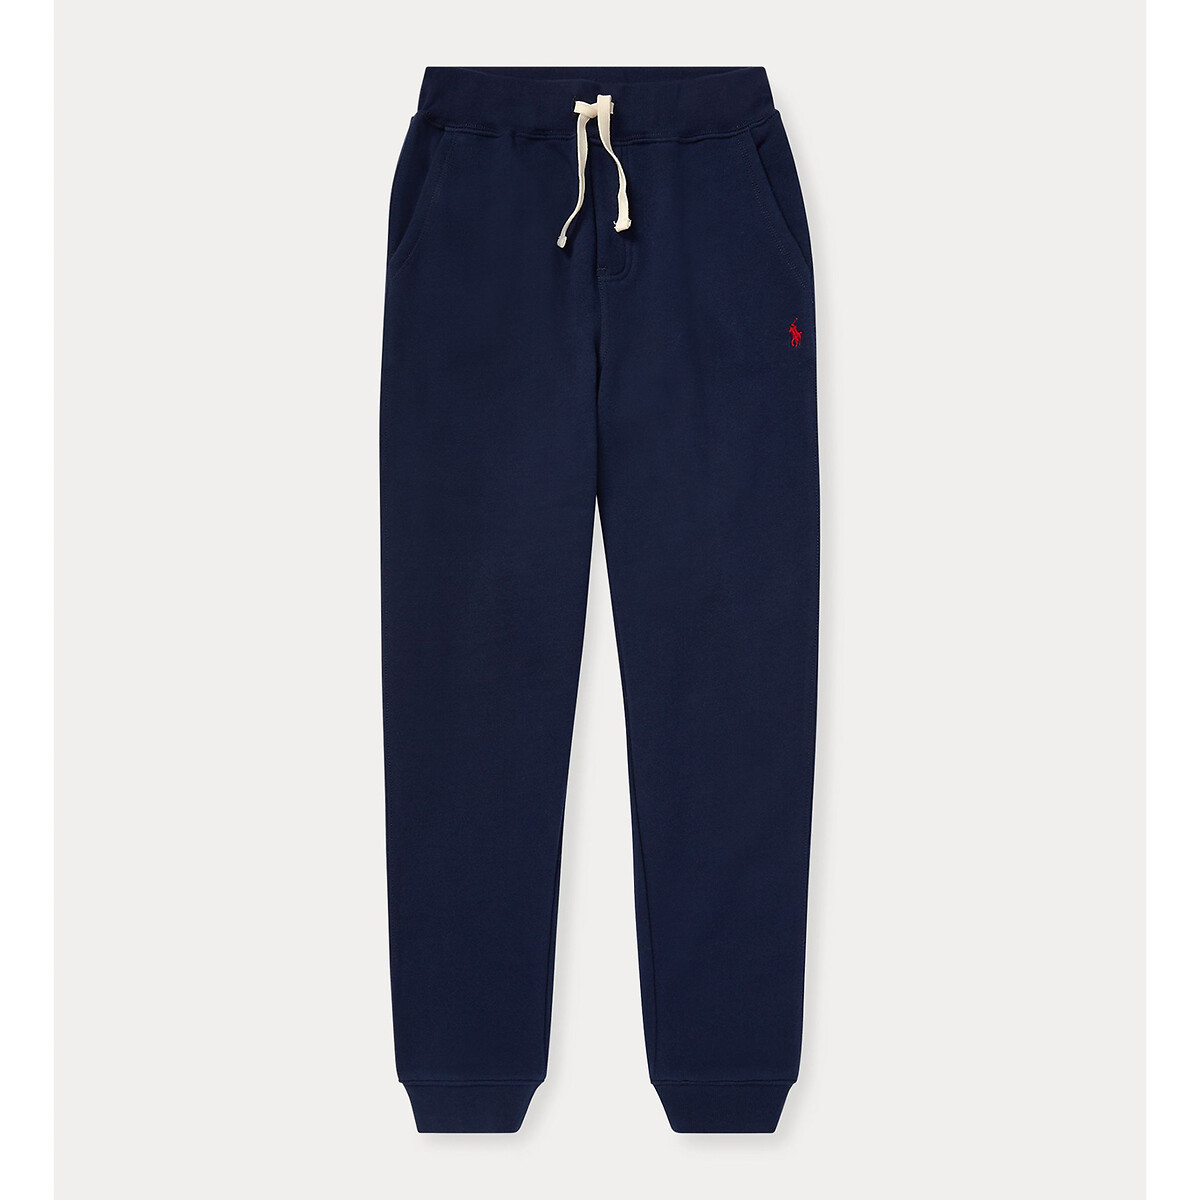 Image of Cotton Mix Joggers, 8-16 Years